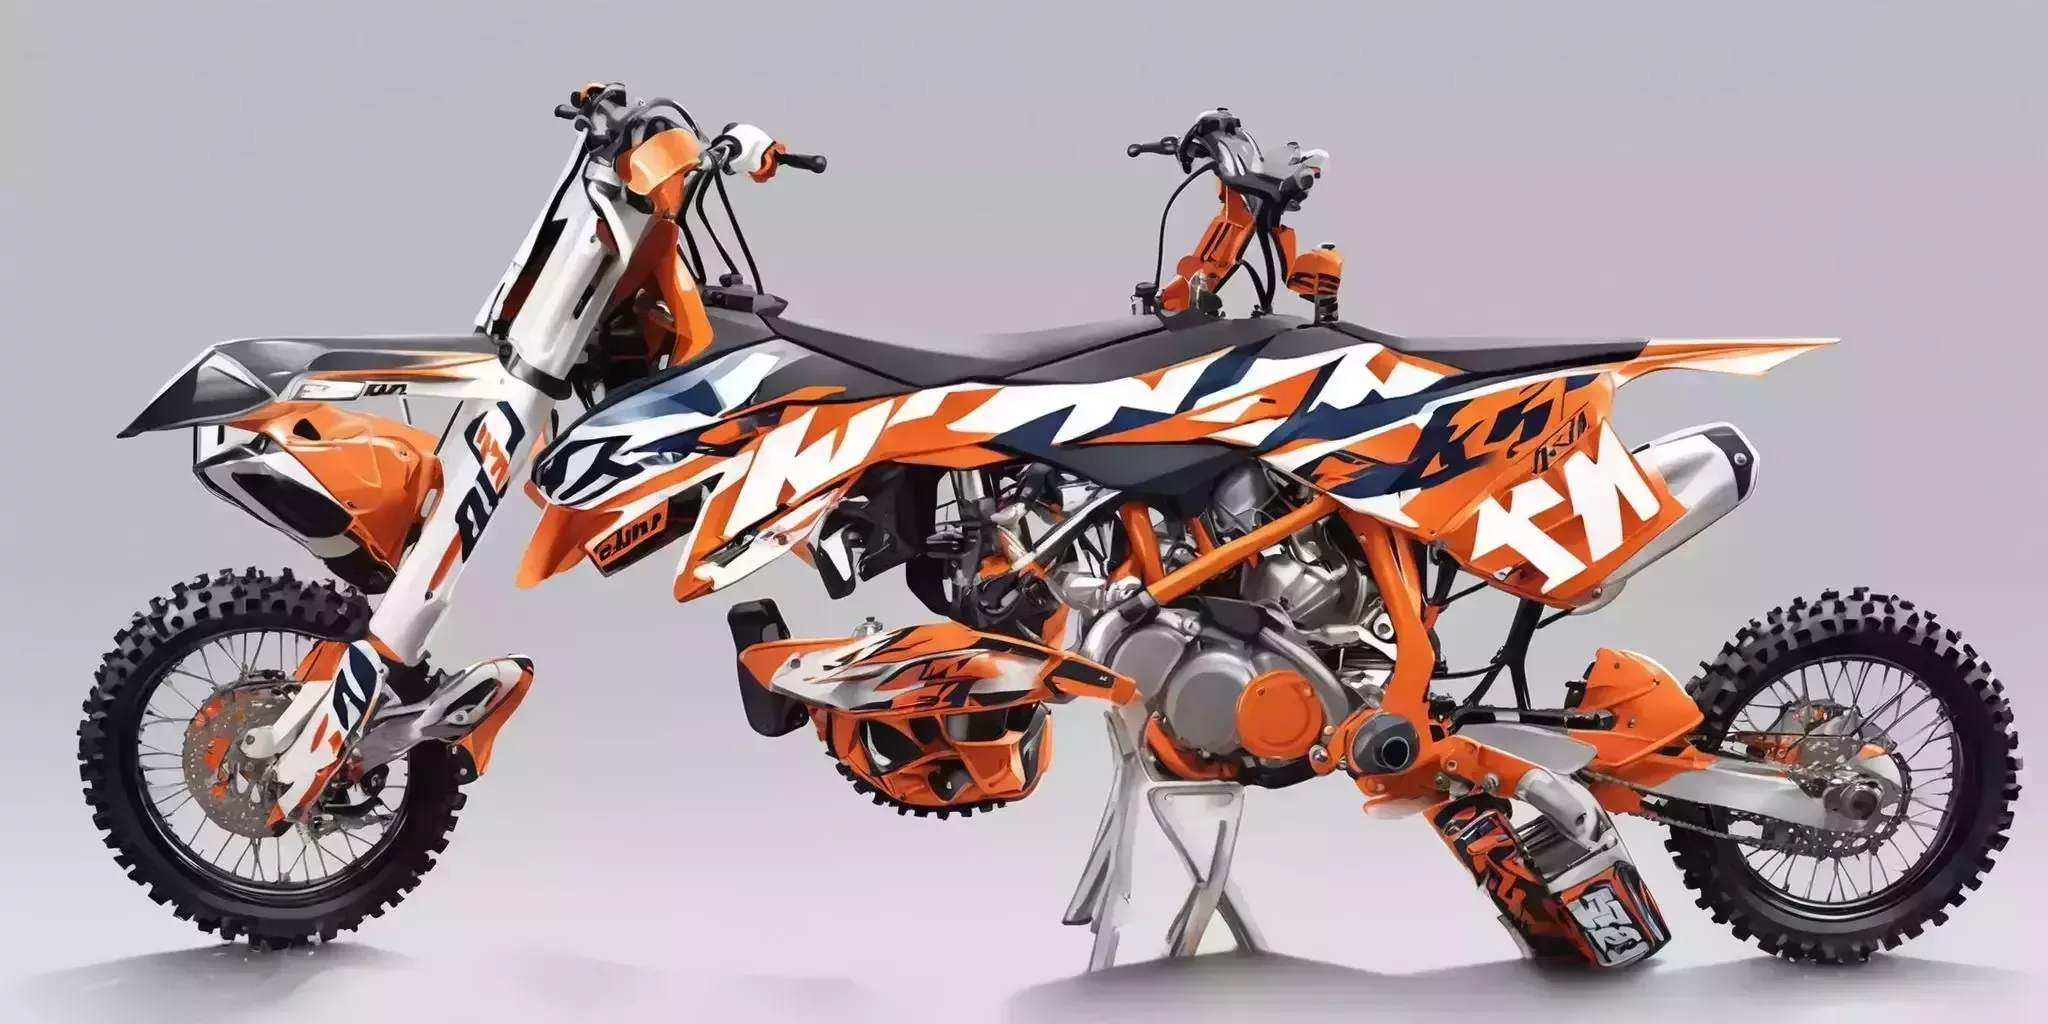 ktm 125sx in illustration style with gradients and white background